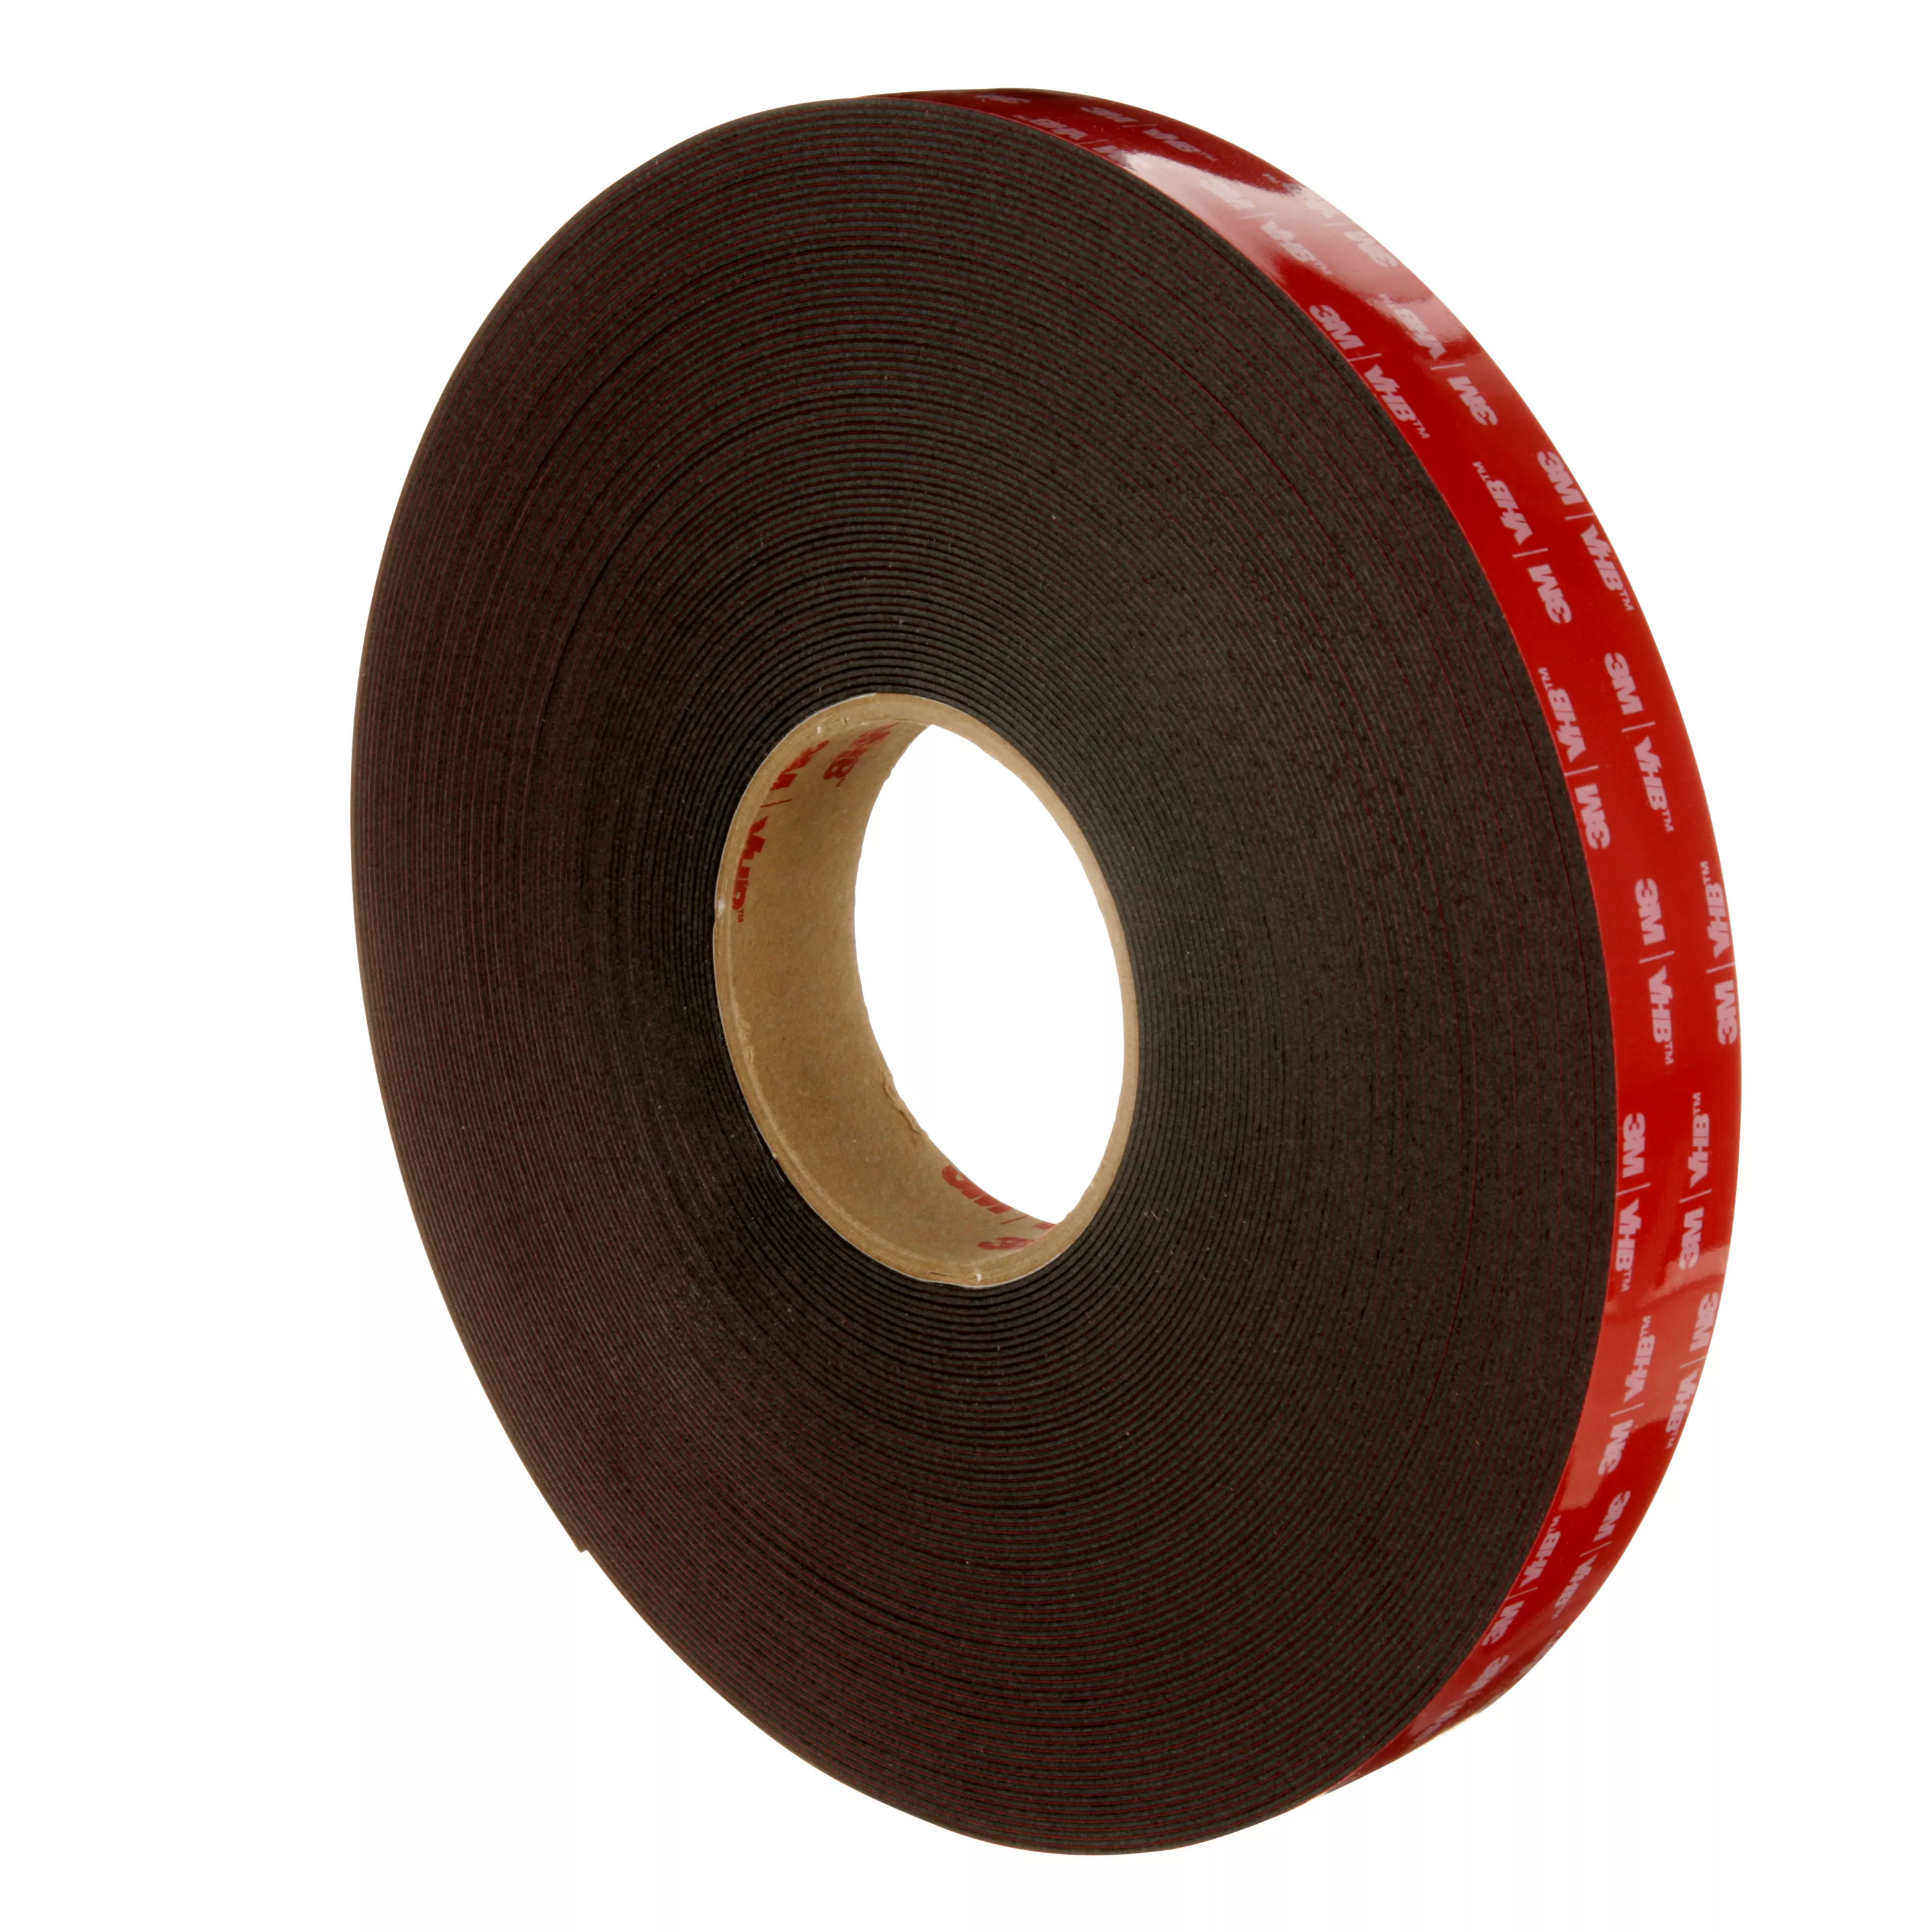 Product Number 5962 | 3M™ VHB™ Tape 5962